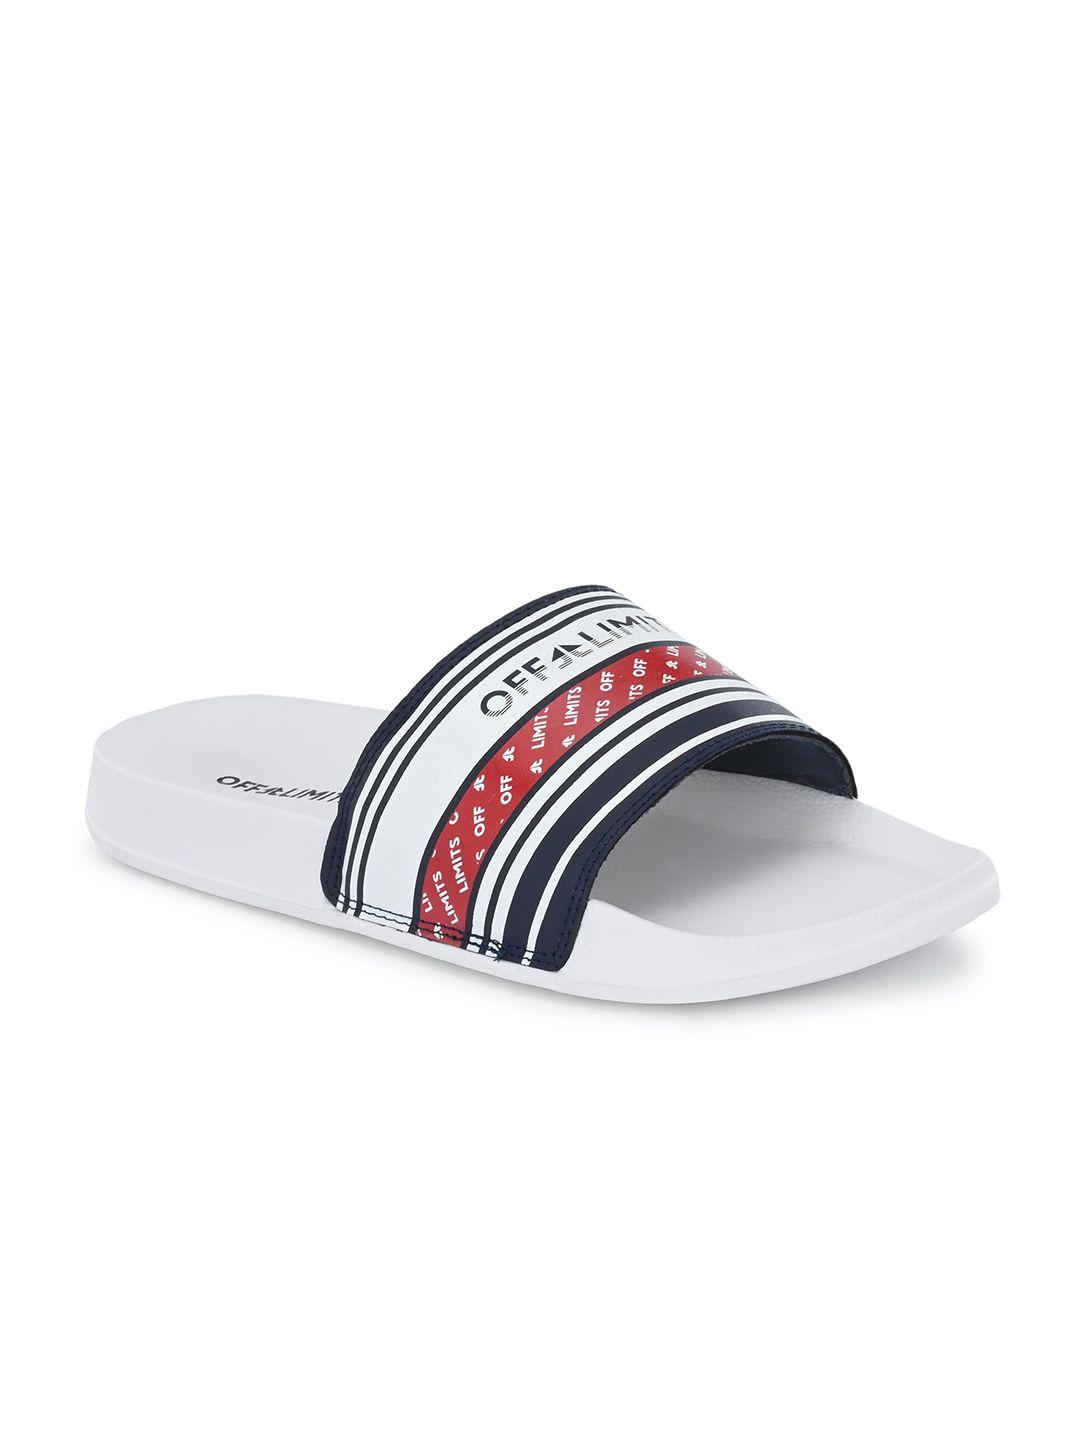 off-limits-men-white-&-blue-printed-sliders